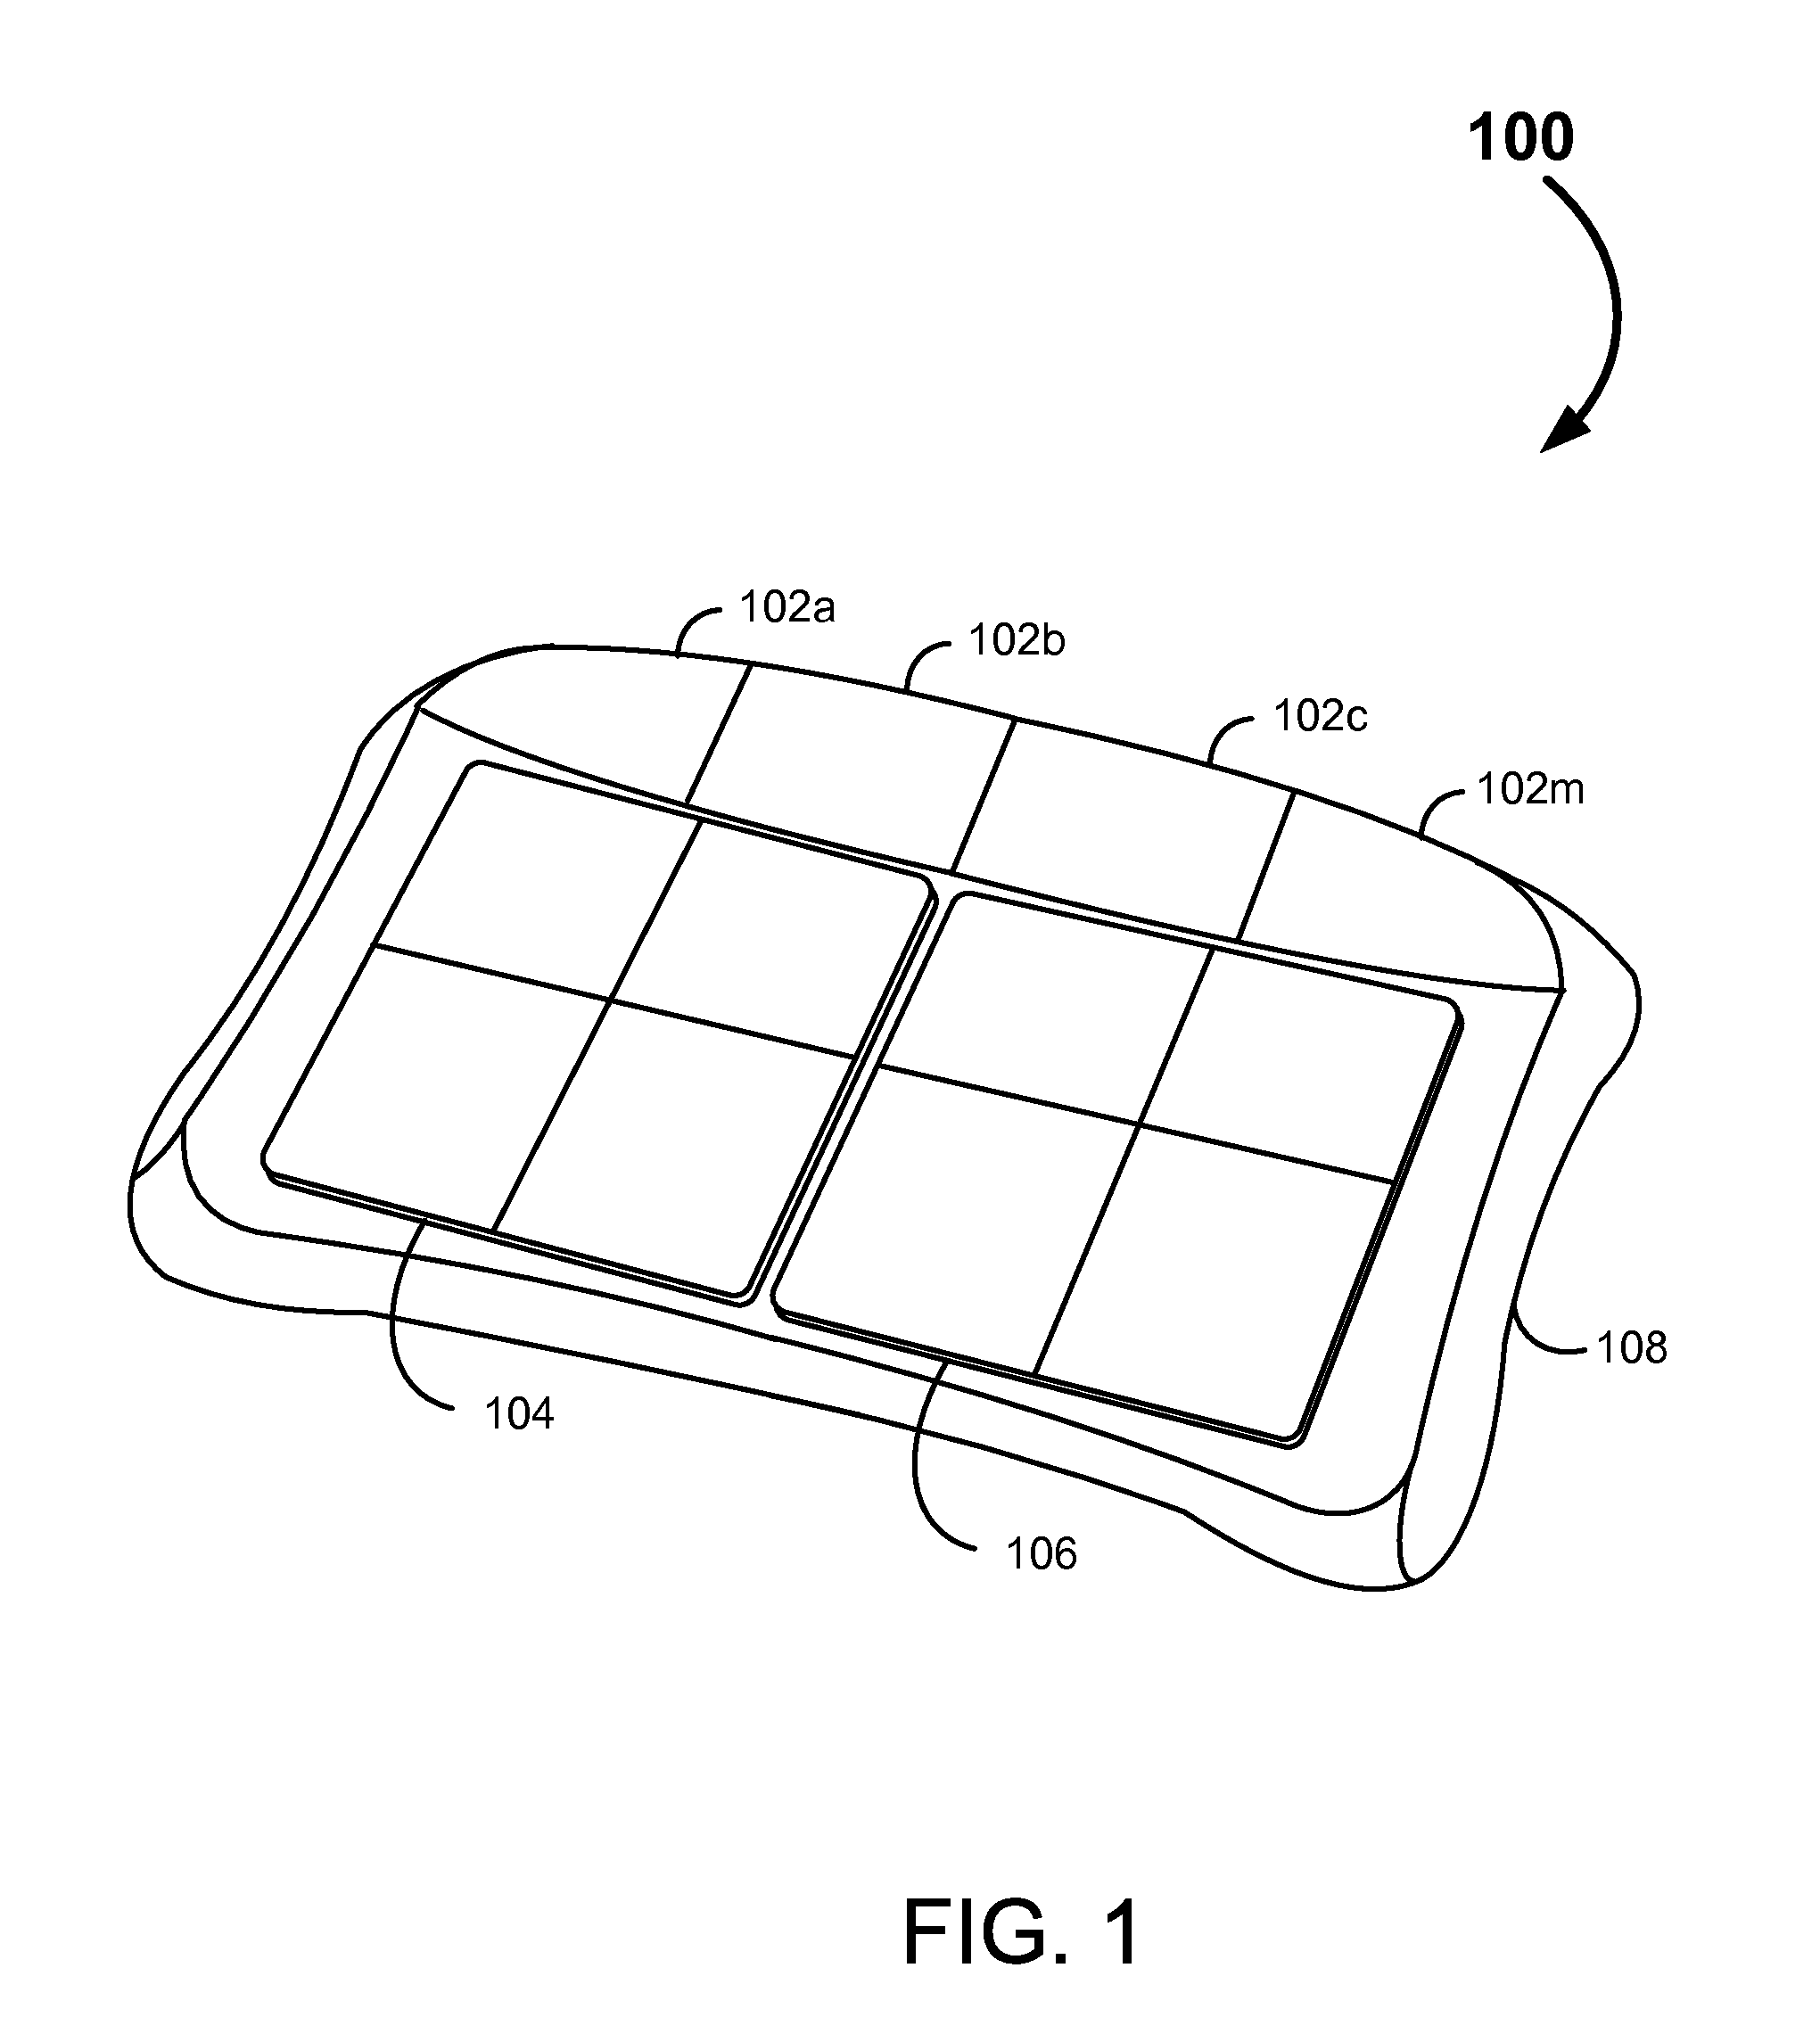 Systems and methods for an improved weight distribution sensory device with integrated controls